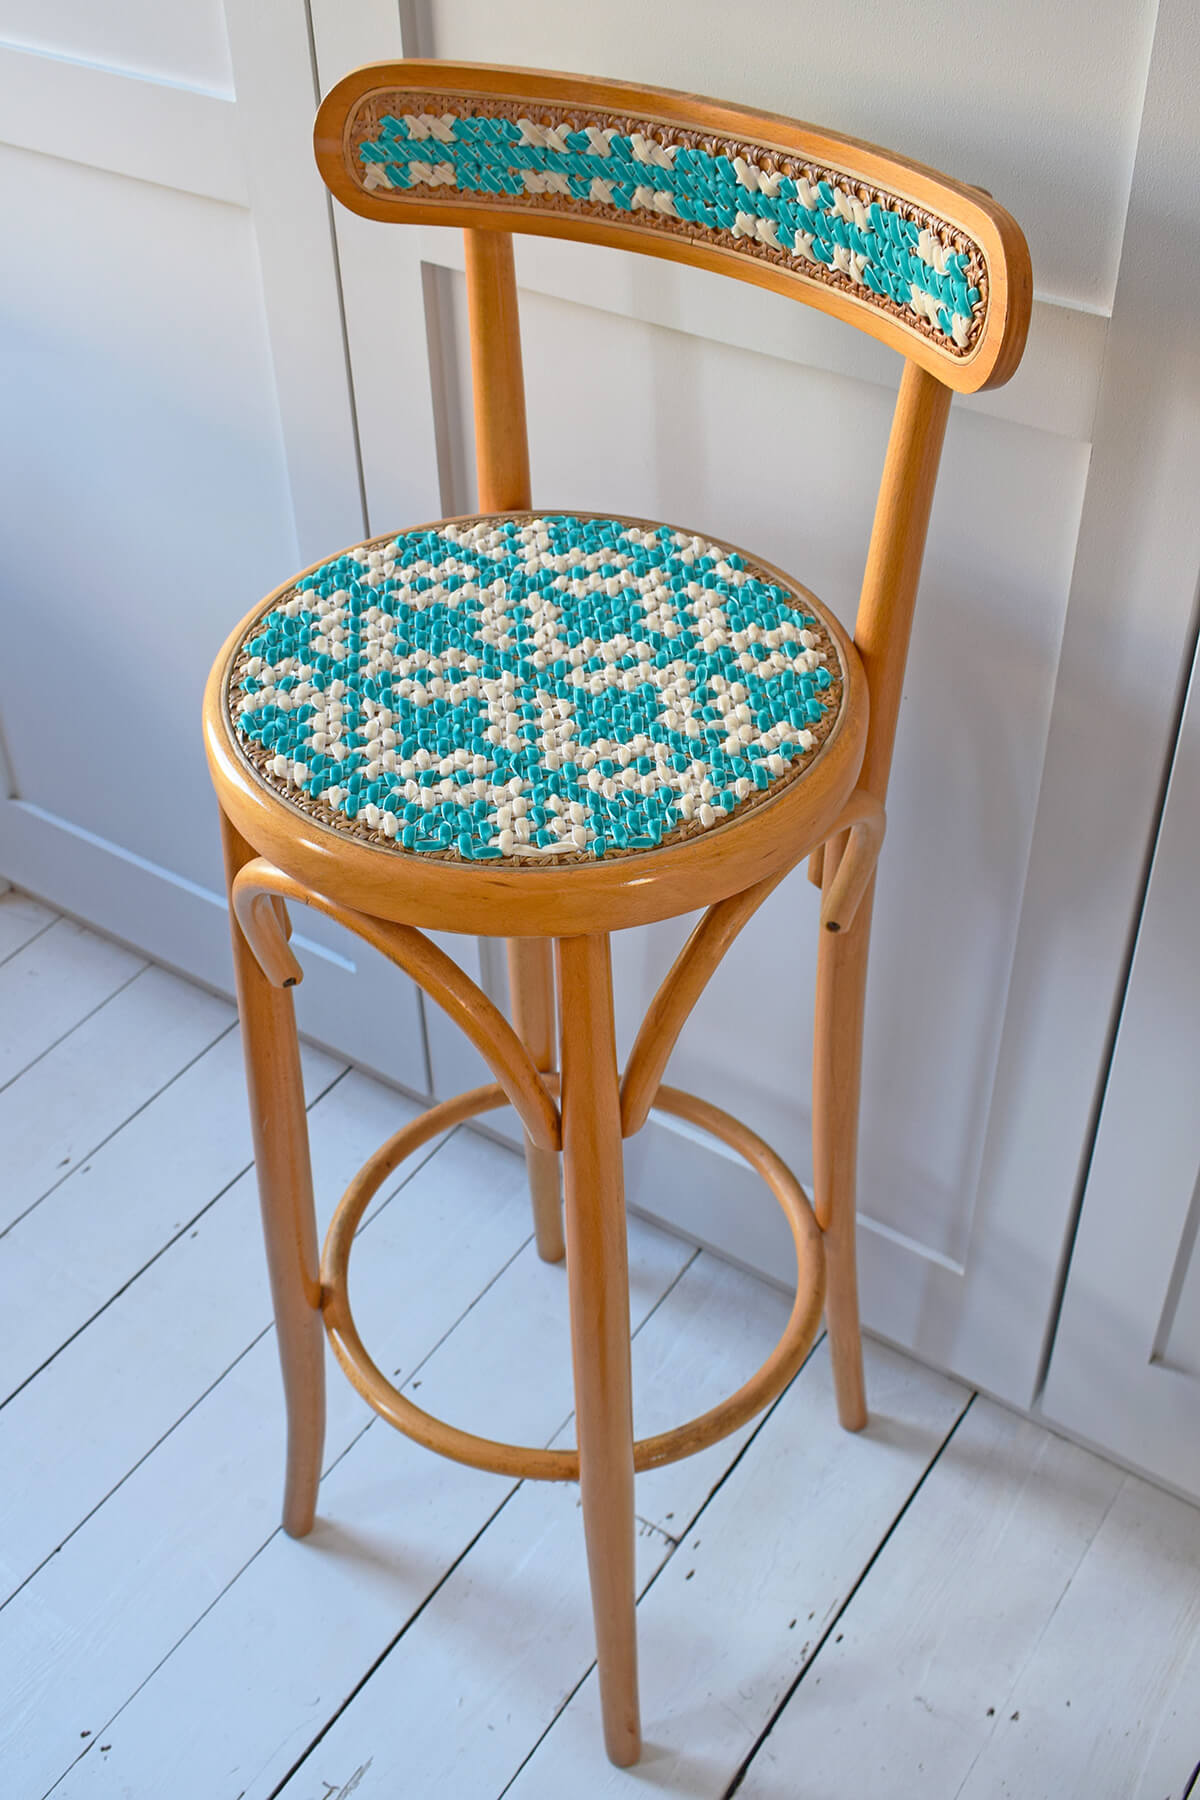 Finished stitched chair